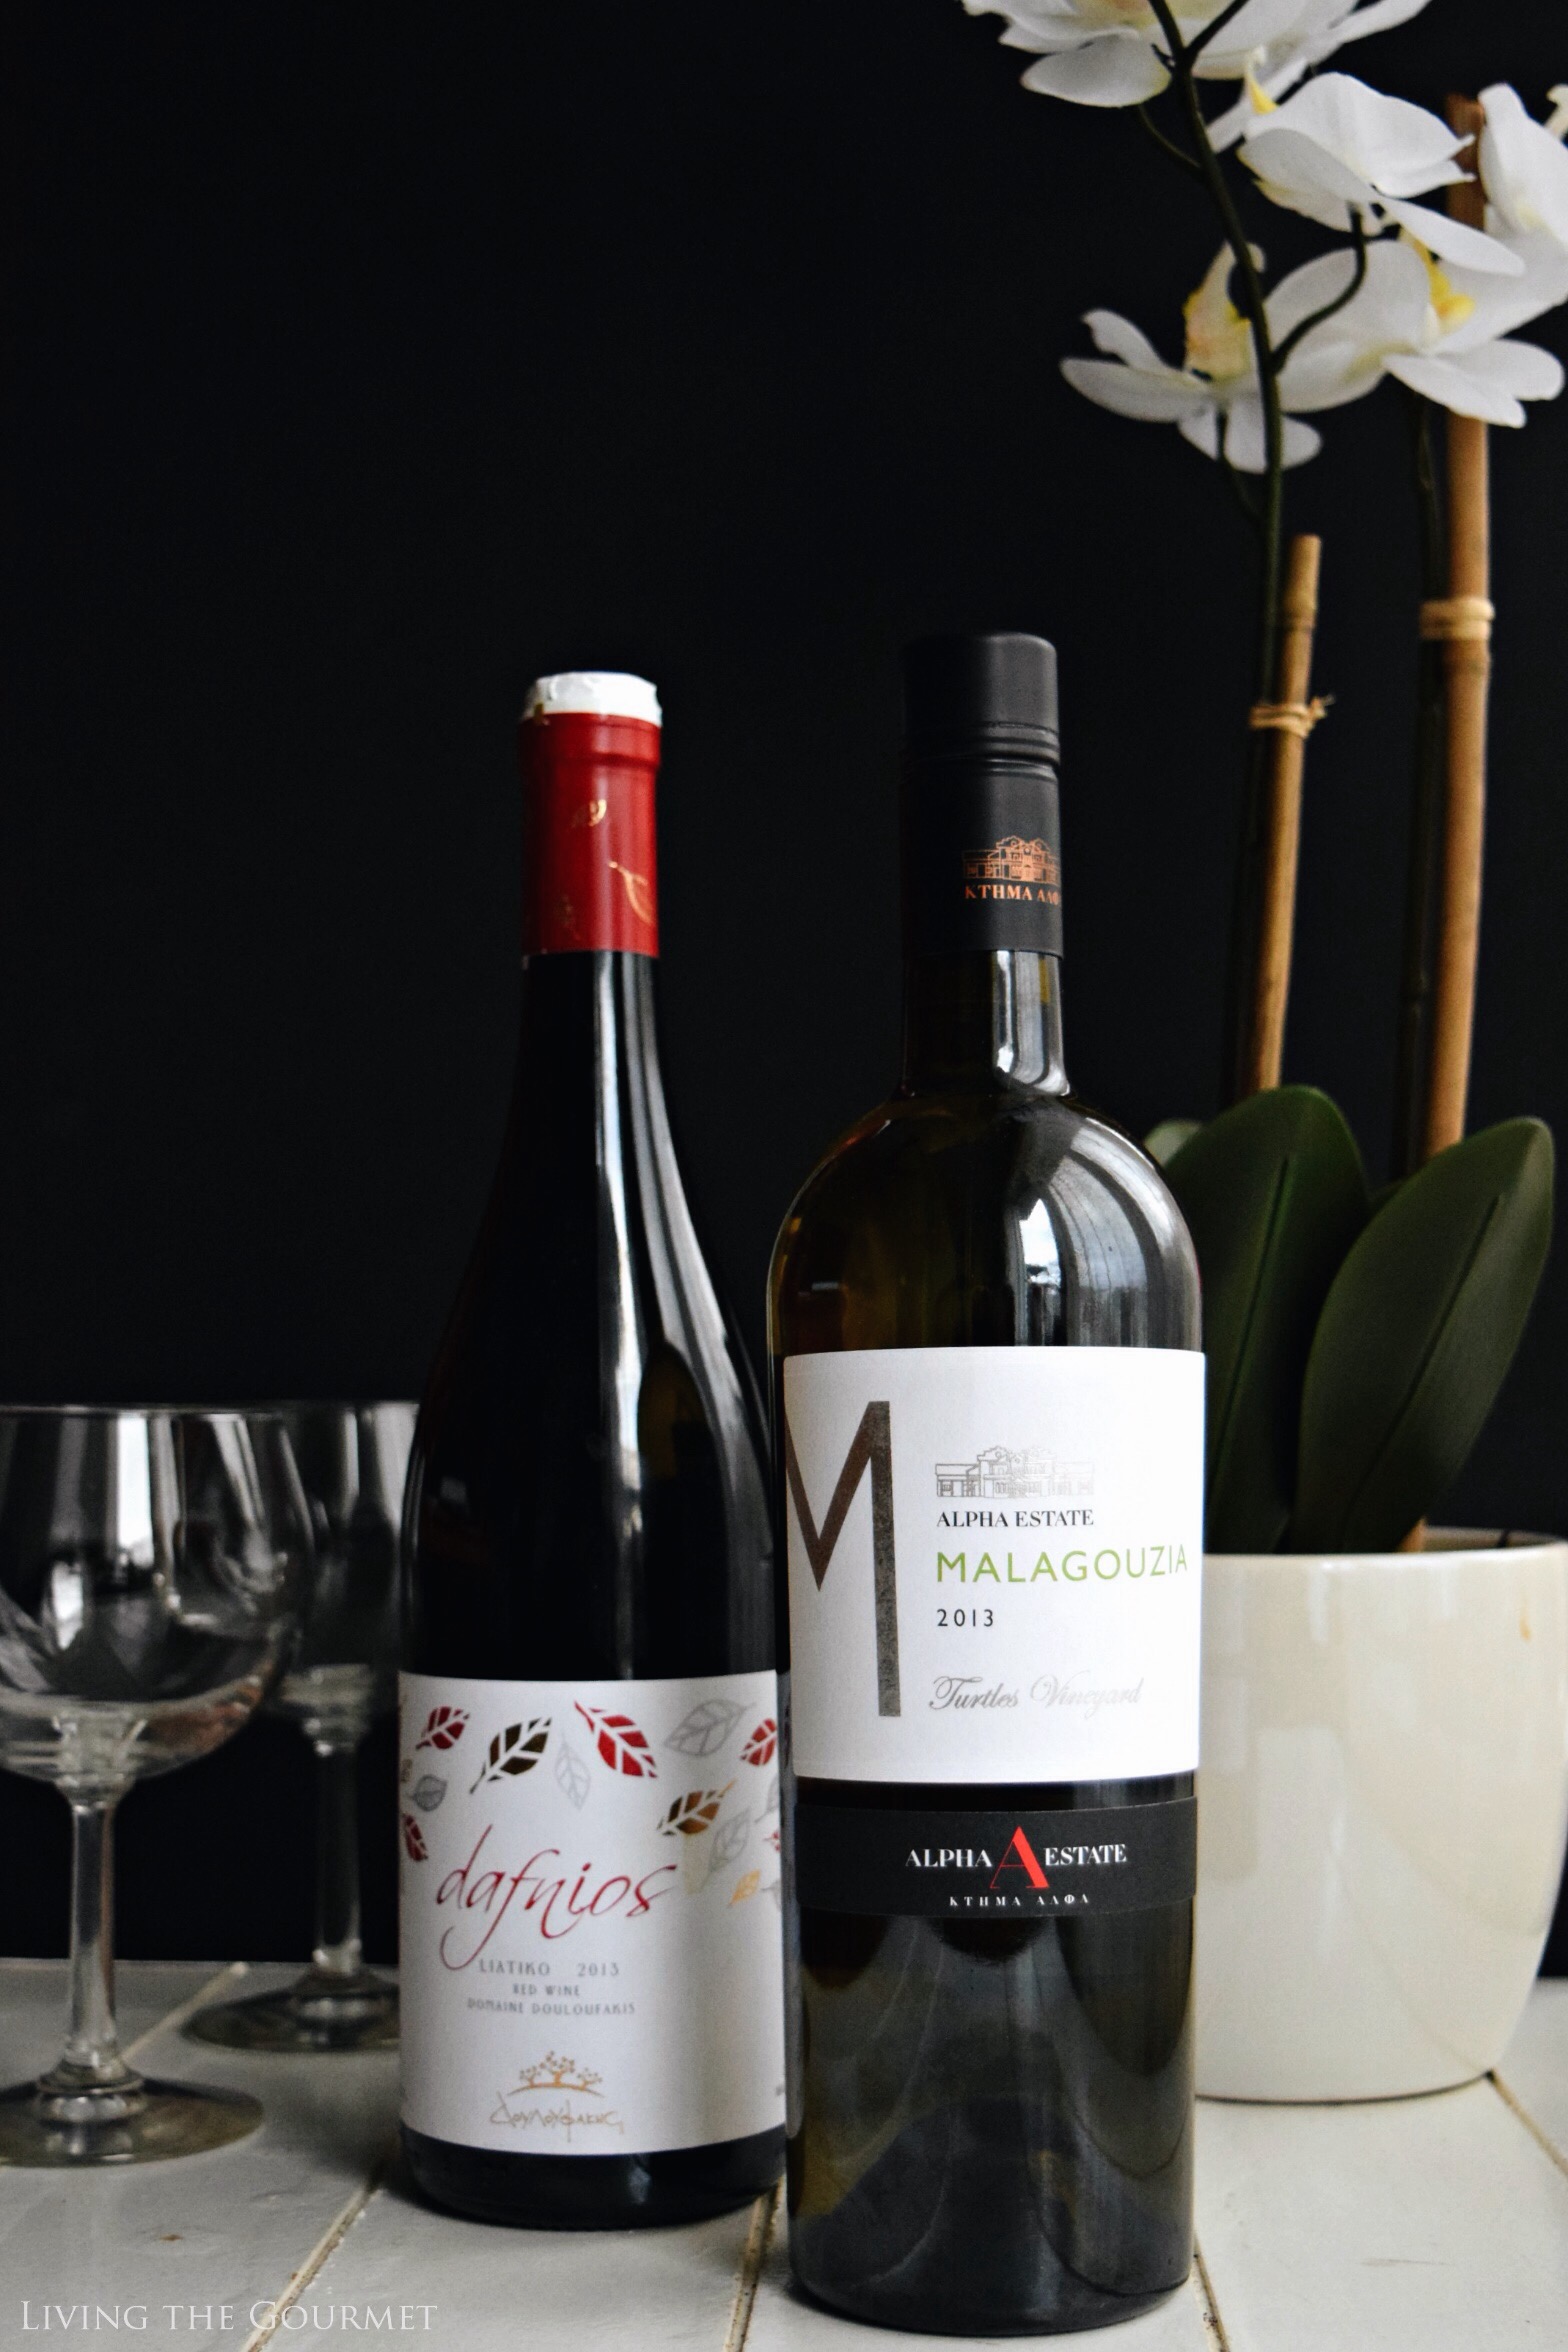 Living the Gourmet: Wines from Greece